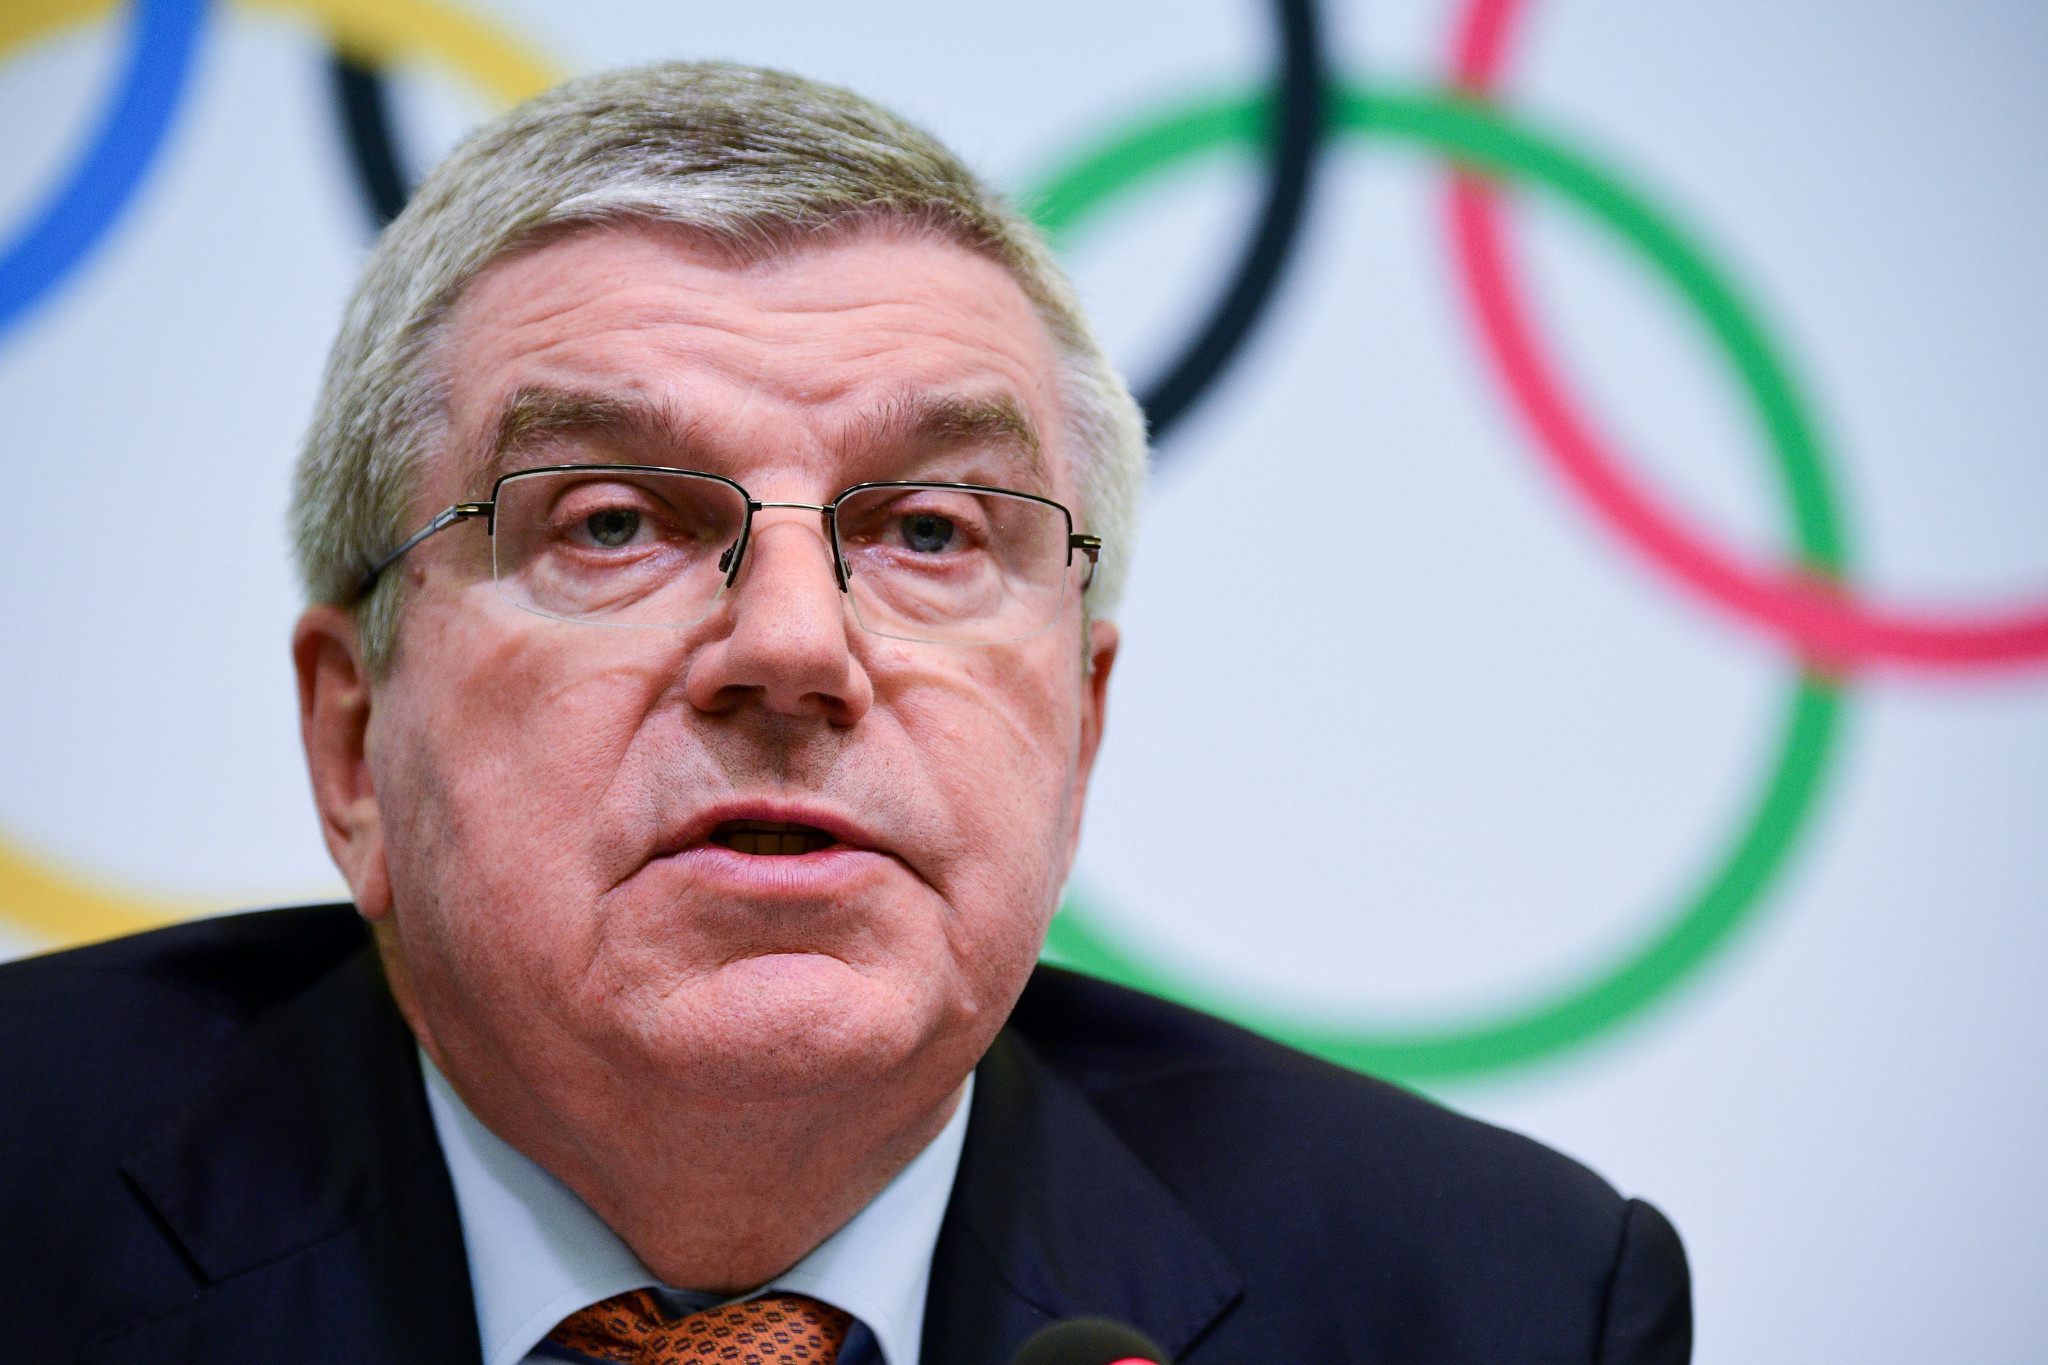 IOC President Thomas Bach has reassured athletes that there will be a boxing tournament in some form at Tokyo 2020 ©Getty Images